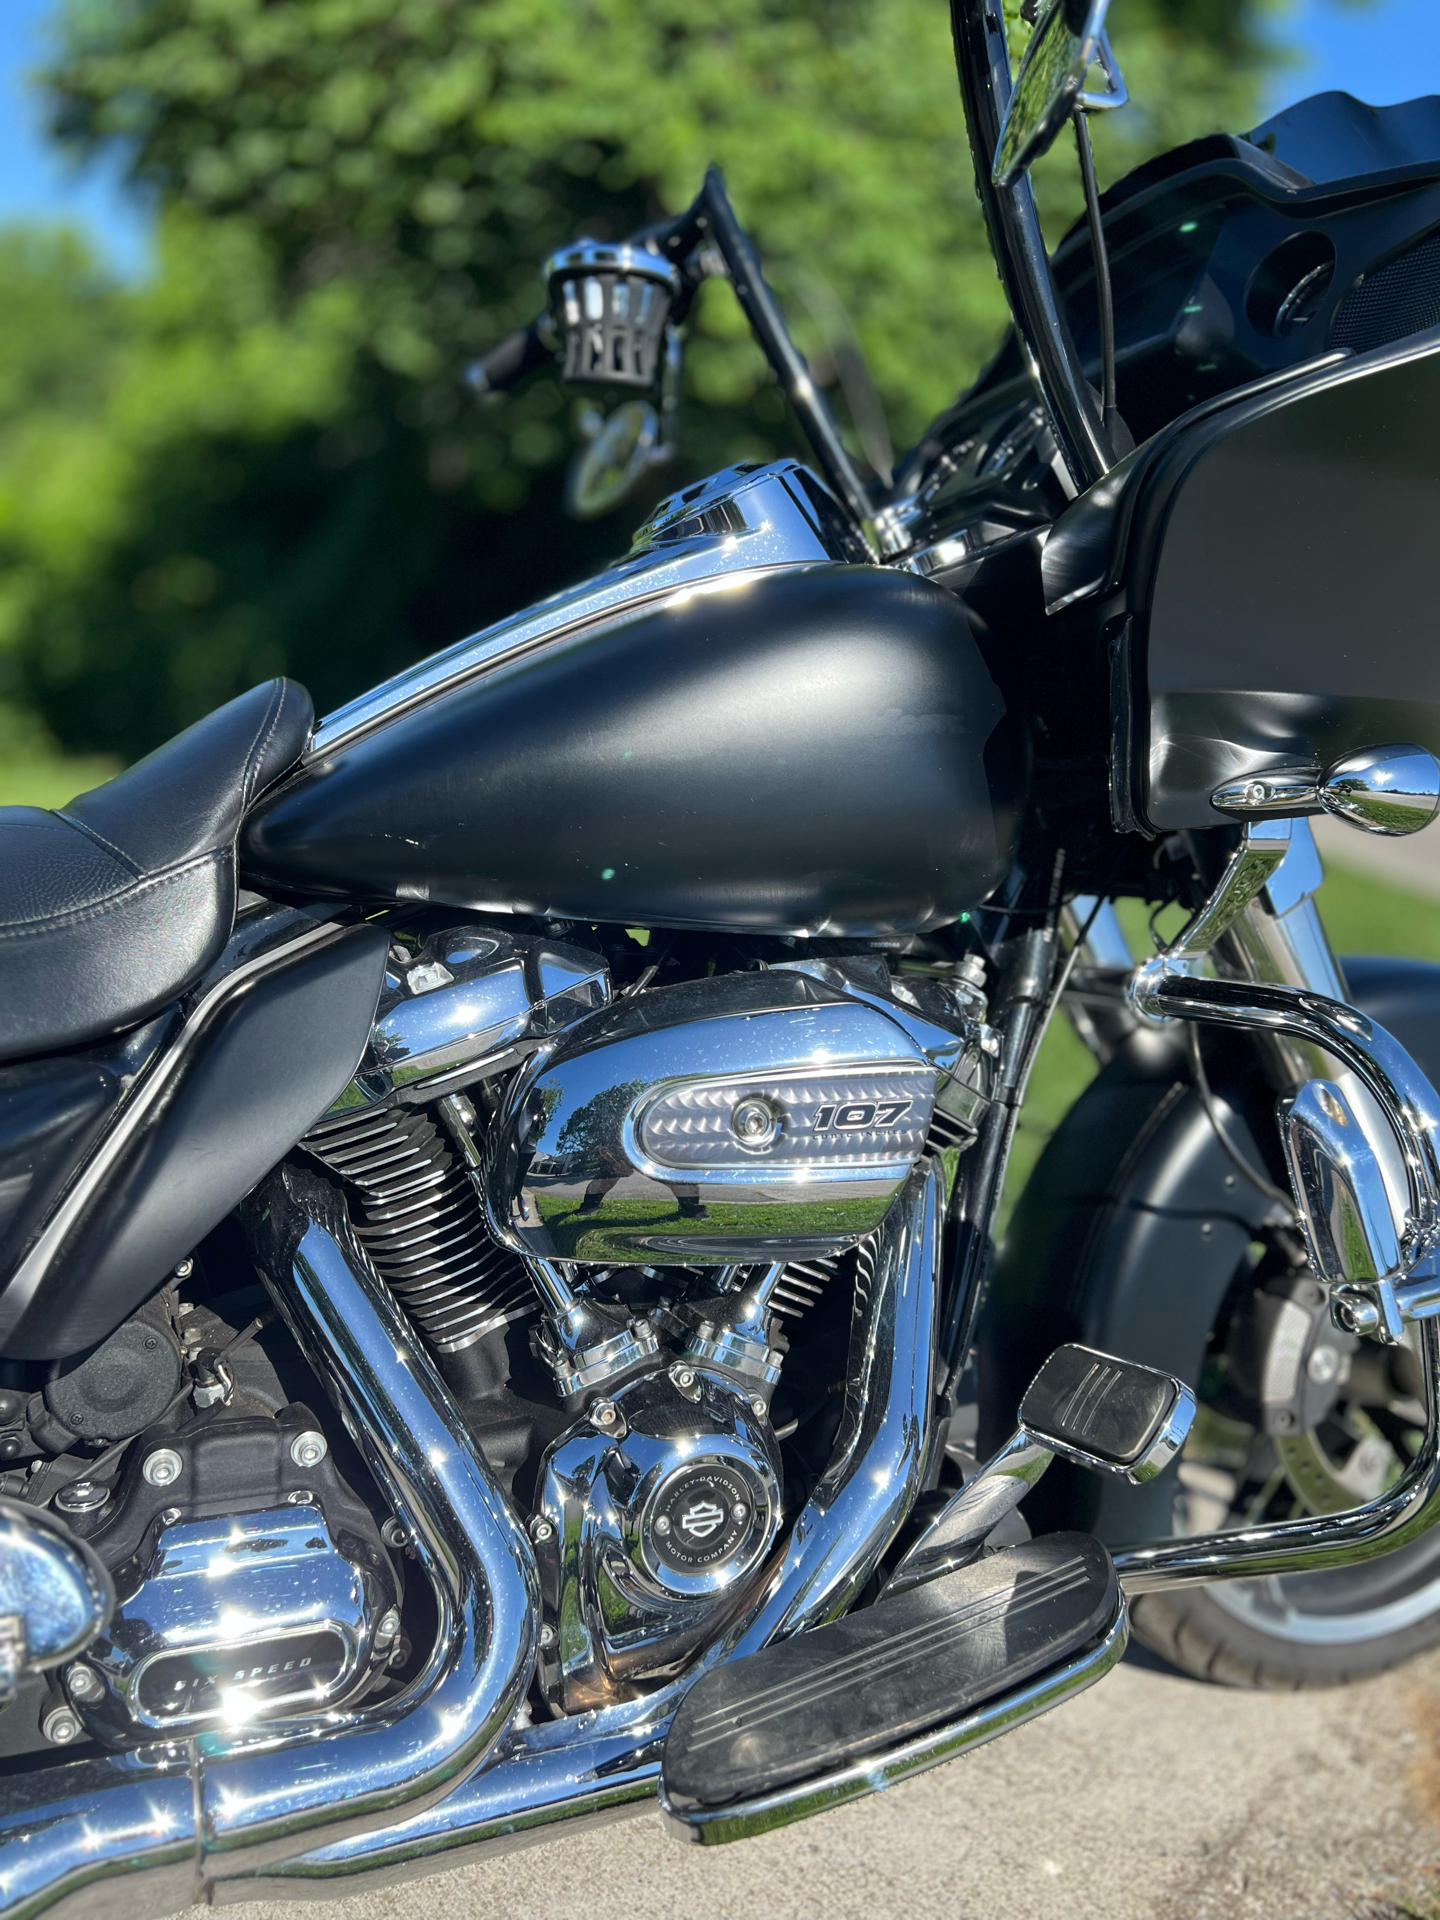 2018 Harley-Davidson Road Glide® in Franklin, Tennessee - Photo 2